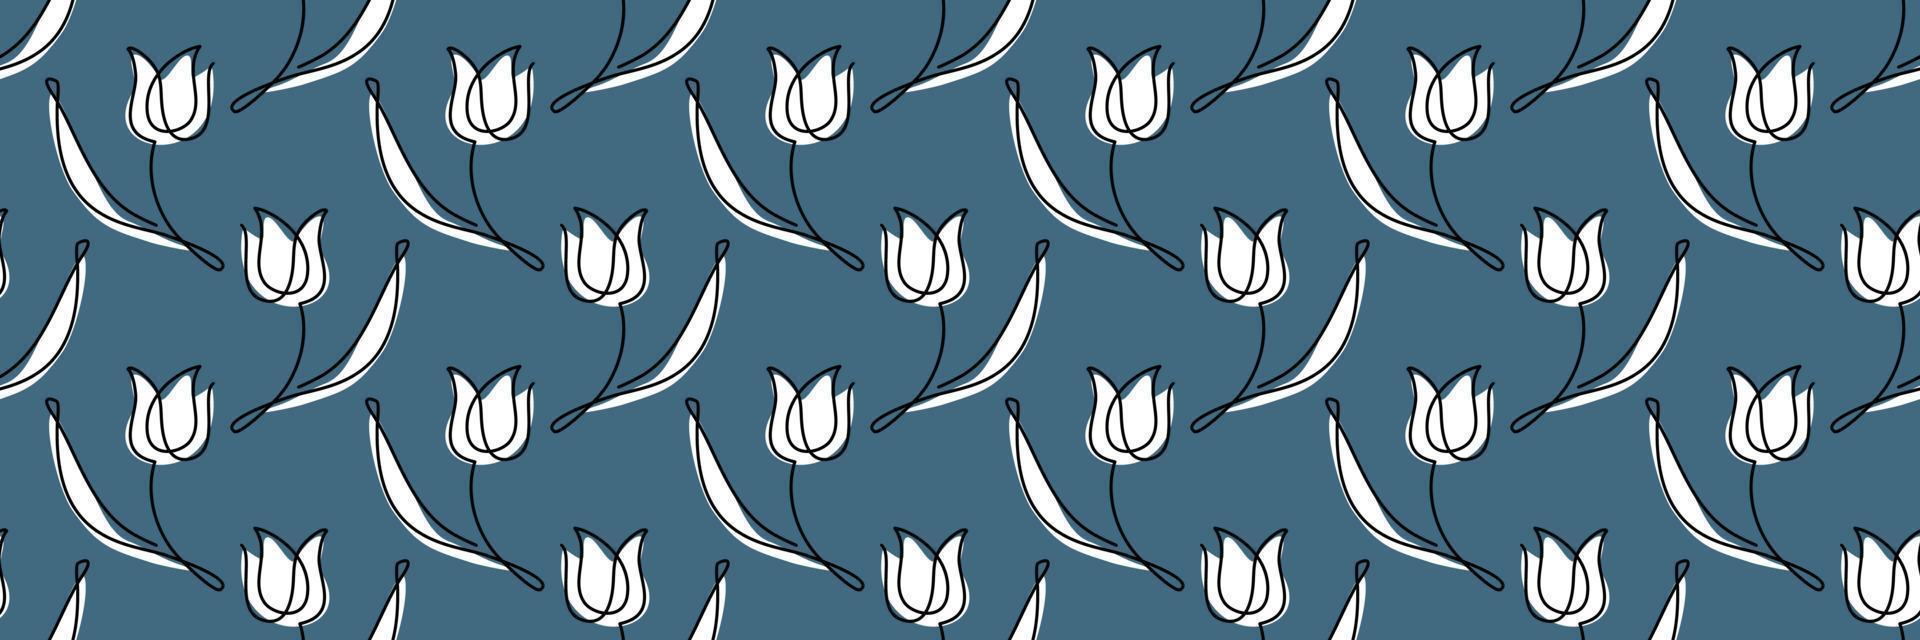 tulips seamless pattern. floral spring wallpaper. floral ornament for interior decor. tulips in one line. textile vector